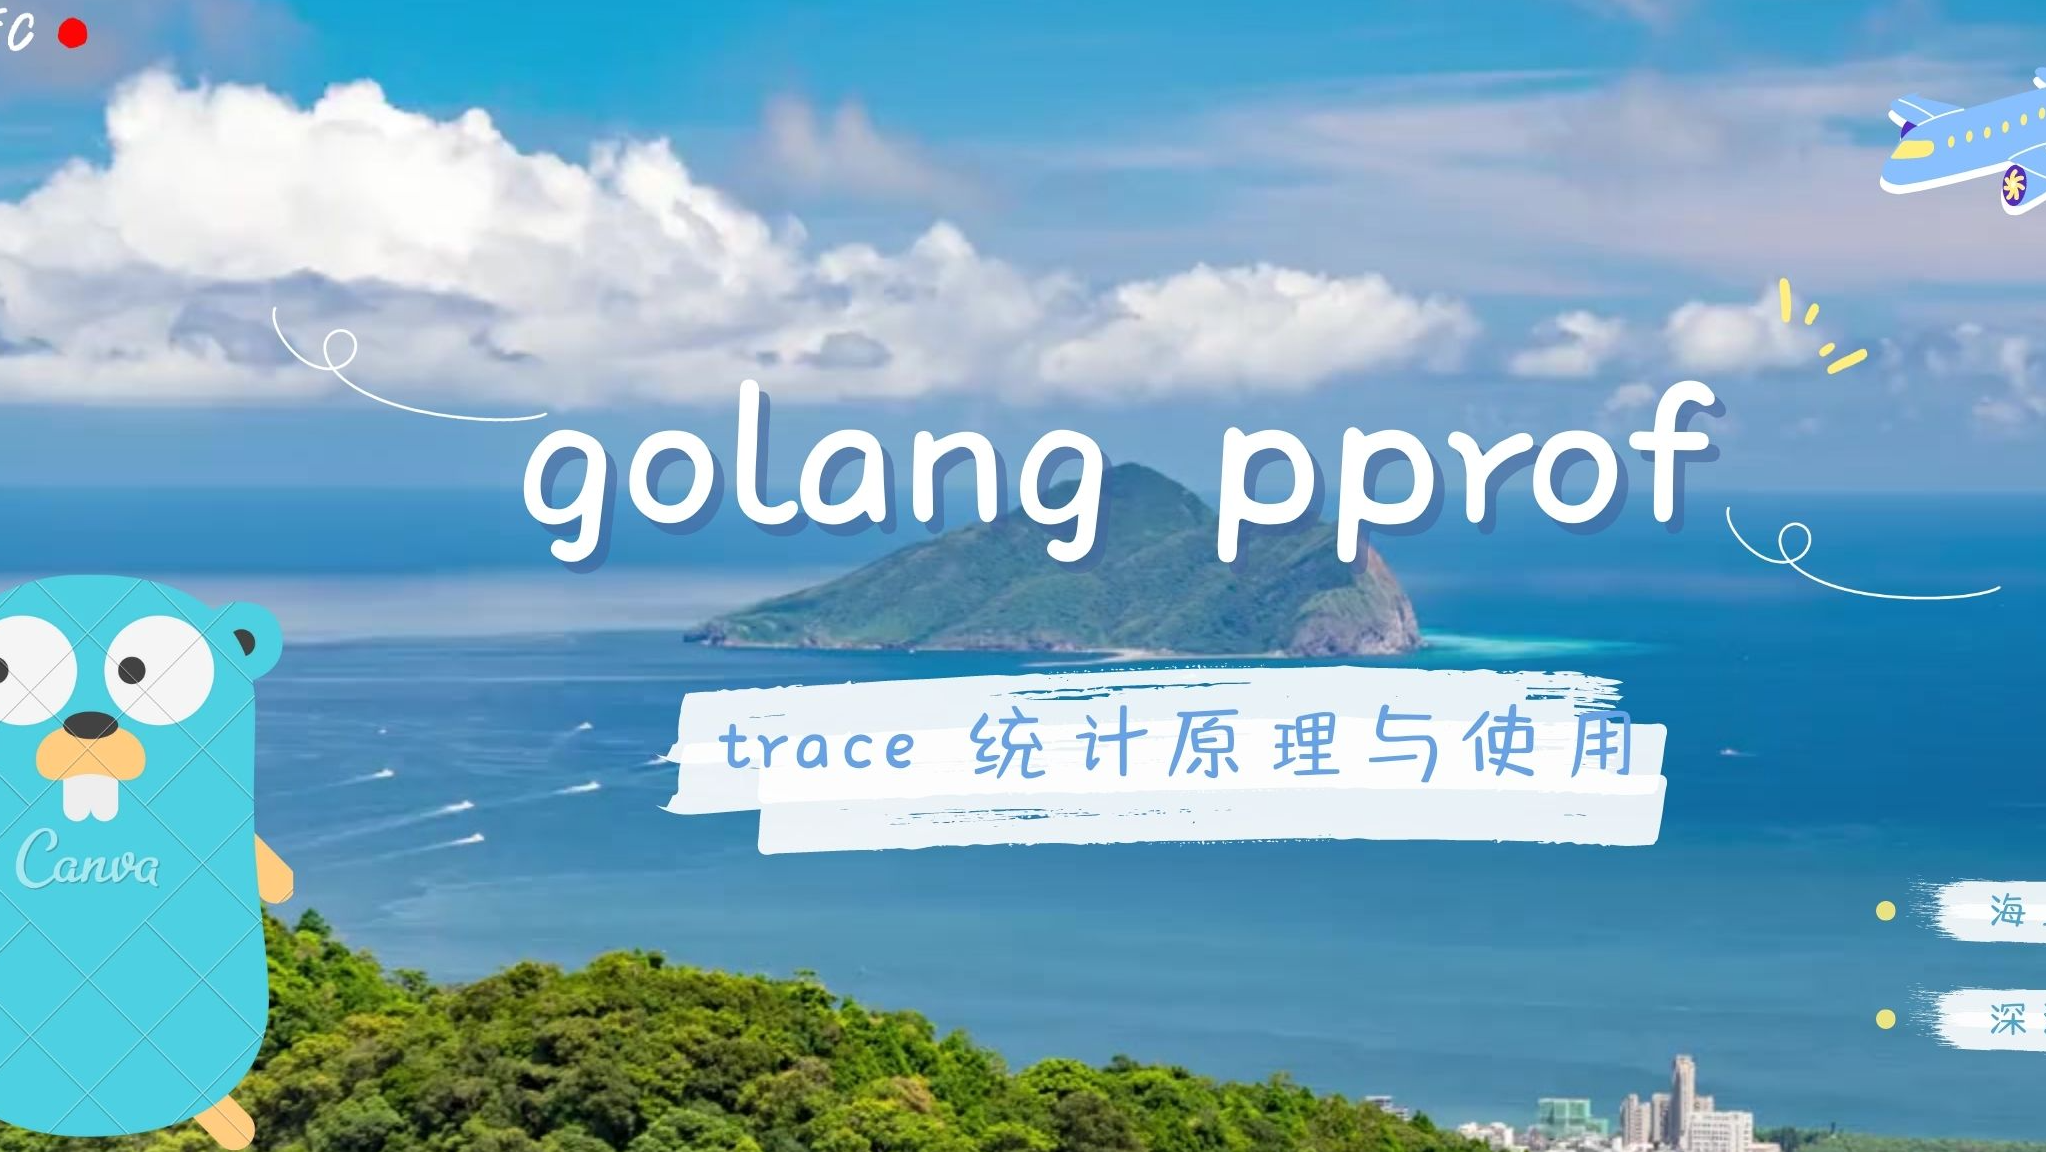 golang pprof 监控系列(1) —— go trace 统计原理与使用